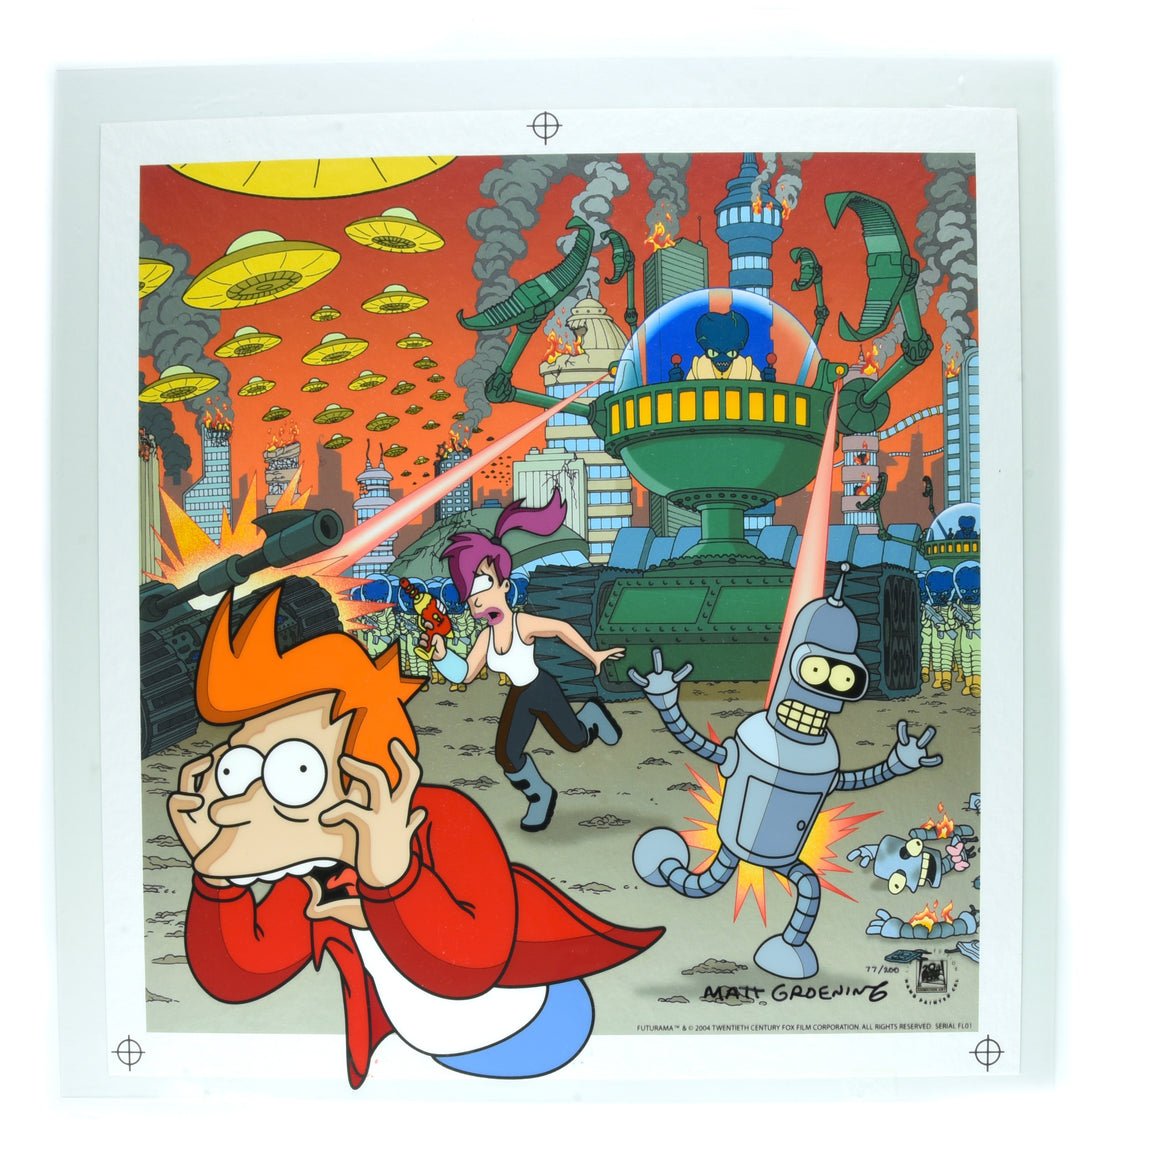 Futurama - "Morbo Attacks!" - Signed Artist Proof Limited Edition Cel w/ Printed Giclee Background